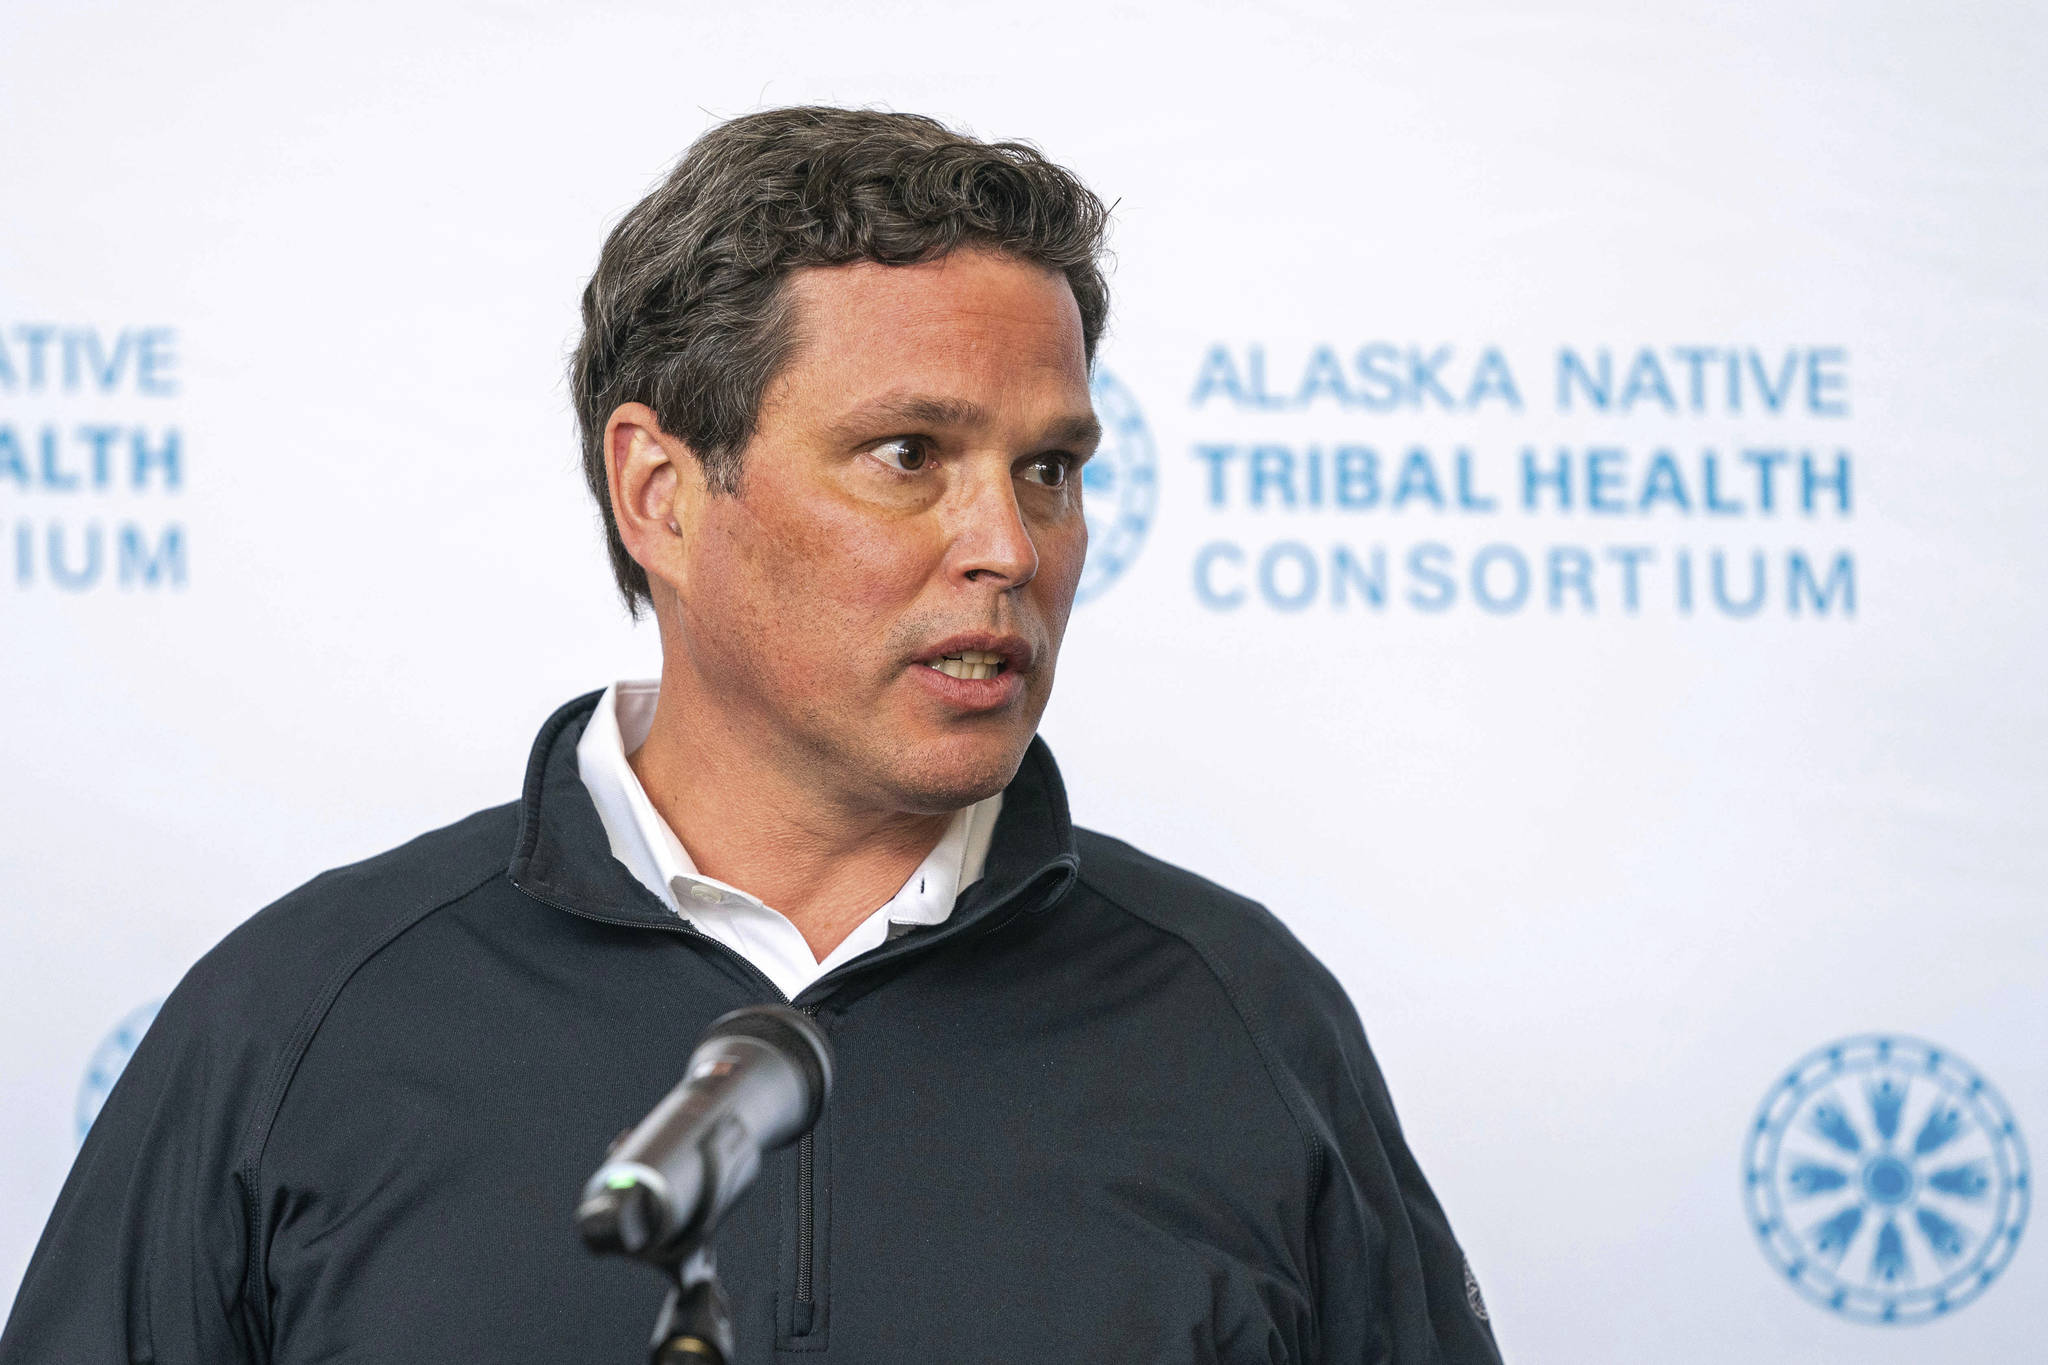 Alaska Native Tribal Health Consortium Chairman Andy Teuber introduces U.S. Health and Human Services Secretary Alex Azar at a press conference at the Alaska Native Tribal Health Consortium, Wednesday, Aug. 12, 2020, in Anchorage. The U.S. Coast Guard was searching for an overdue helicopter piloted by Teuber who is the former head of the Alaska Native Tribal Health Consortium. Teuber had resigned last week after allegations of sexual misconduct surfaced against him which he denied. Teuber left Anchorage about 2 p.m. Tuesday, March 2, 2021, in a black and white Robinson R66 helicopter en route to Kodiak Island. (Loren Holmes / Anchorage Daily News)